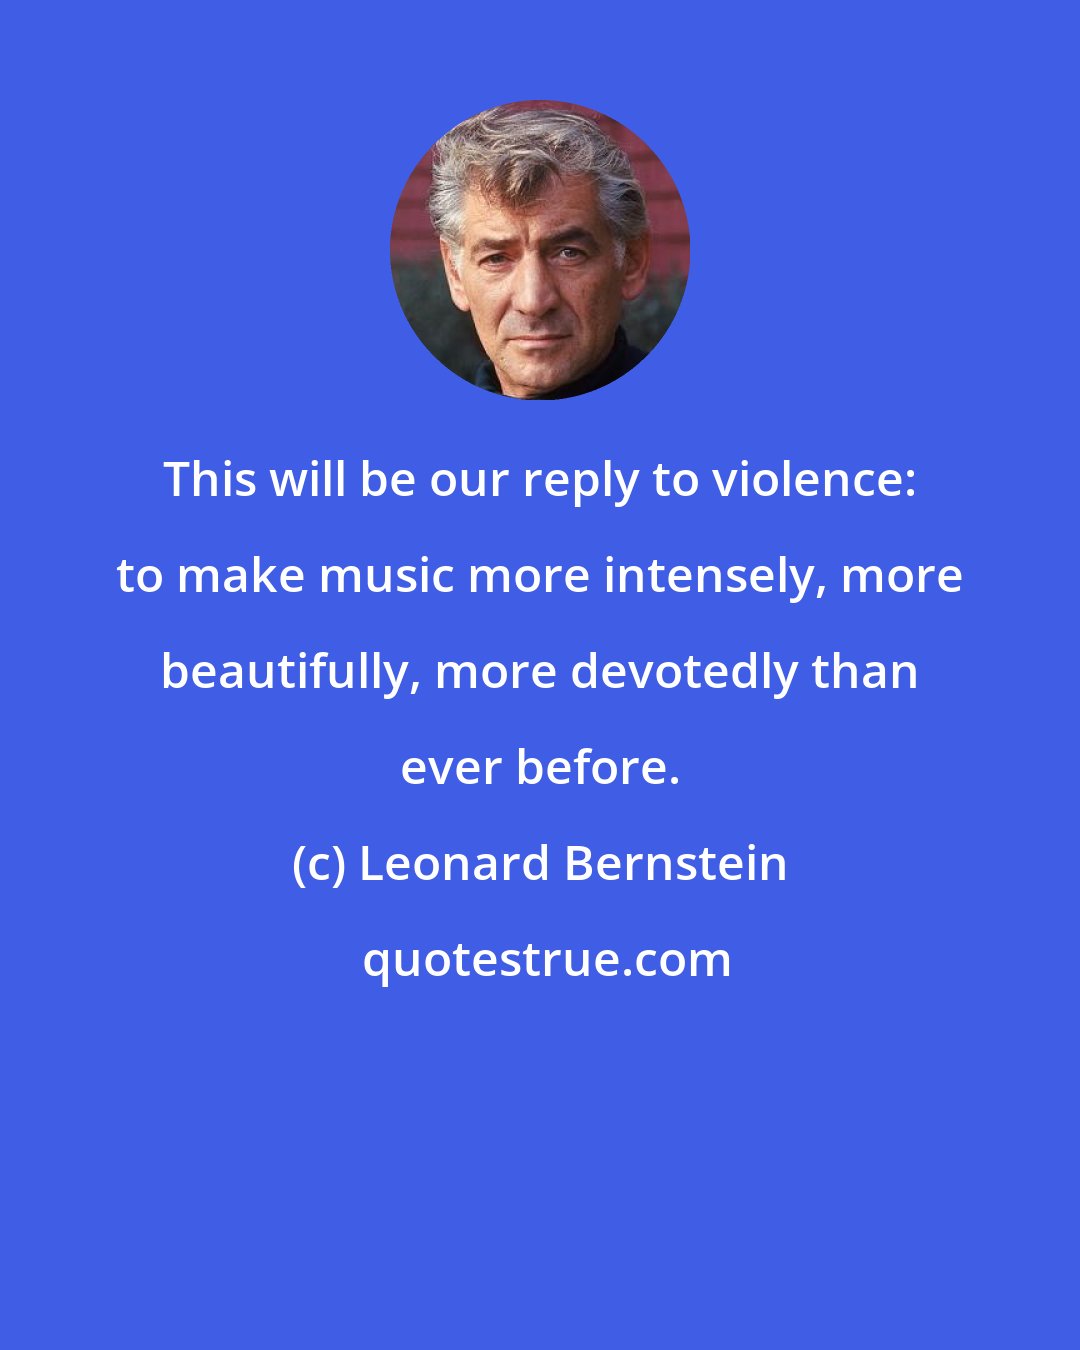 Leonard Bernstein: This will be our reply to violence: to make music more intensely, more beautifully, more devotedly than ever before.